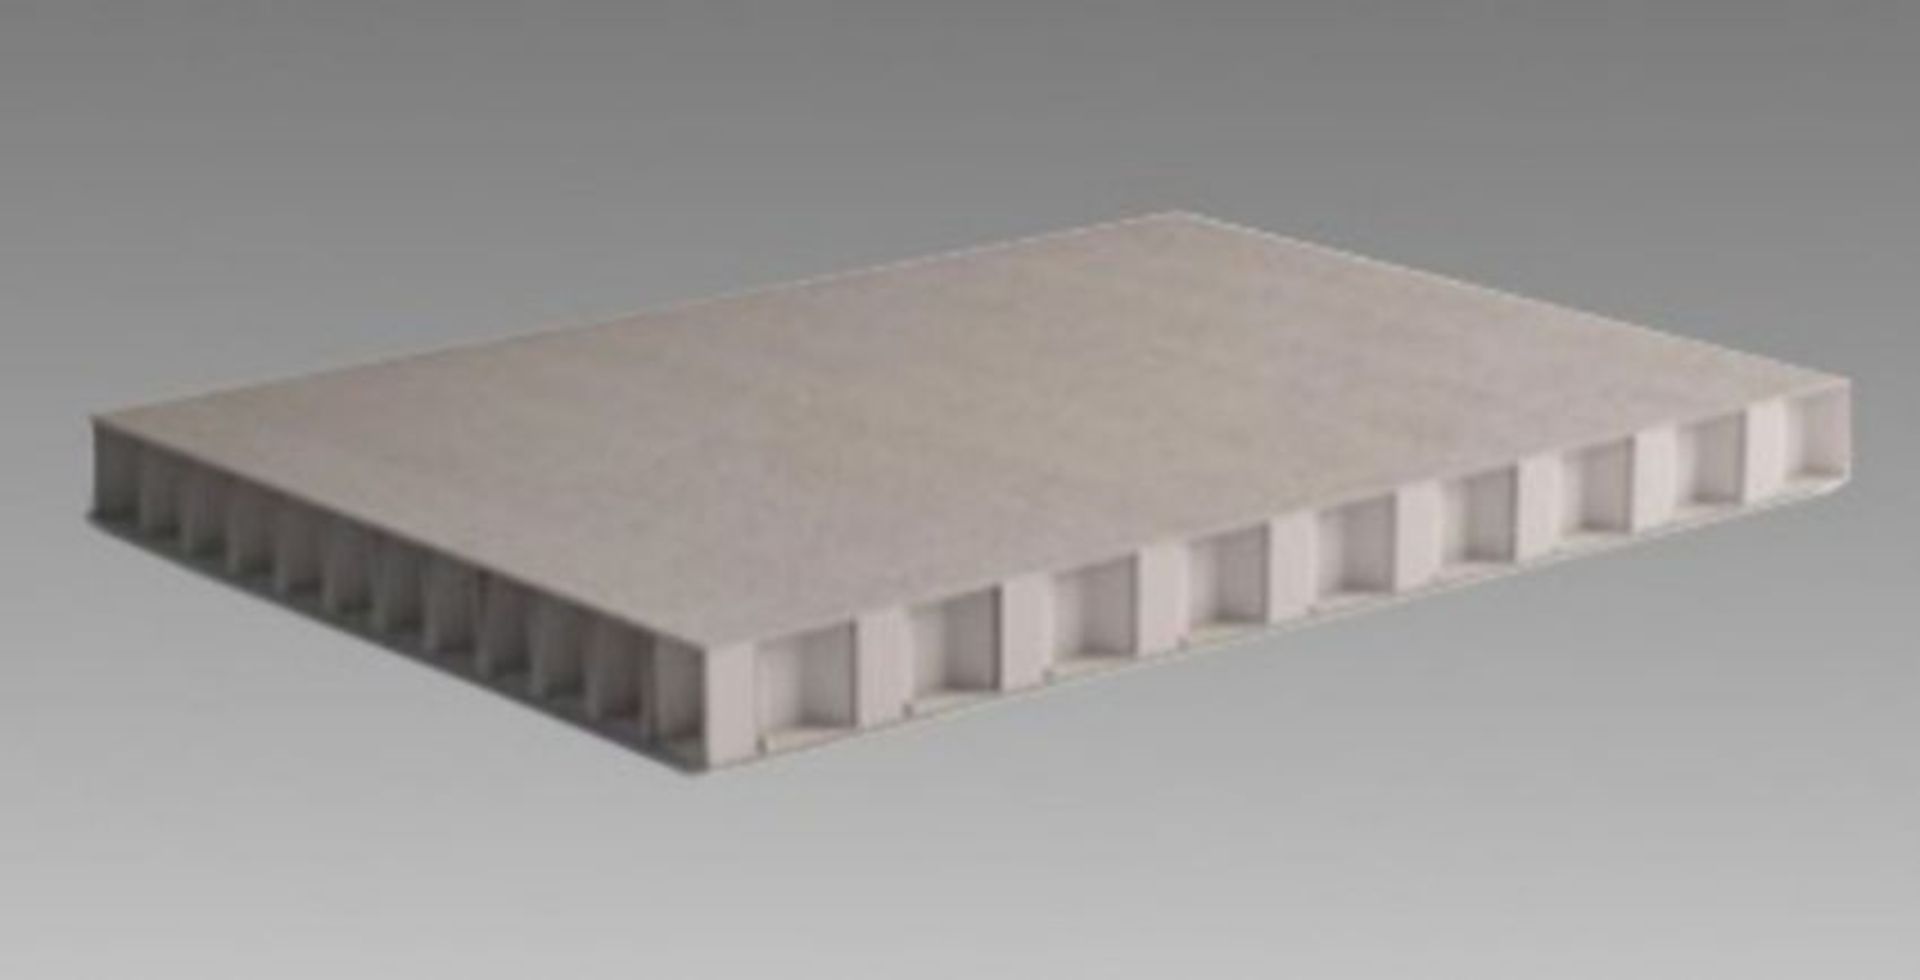 100 x ThermHex Thermoplastic Honeycomb Core Panels - Size: Approx. 2630 x 1210 x 18mm - New - Image 3 of 5